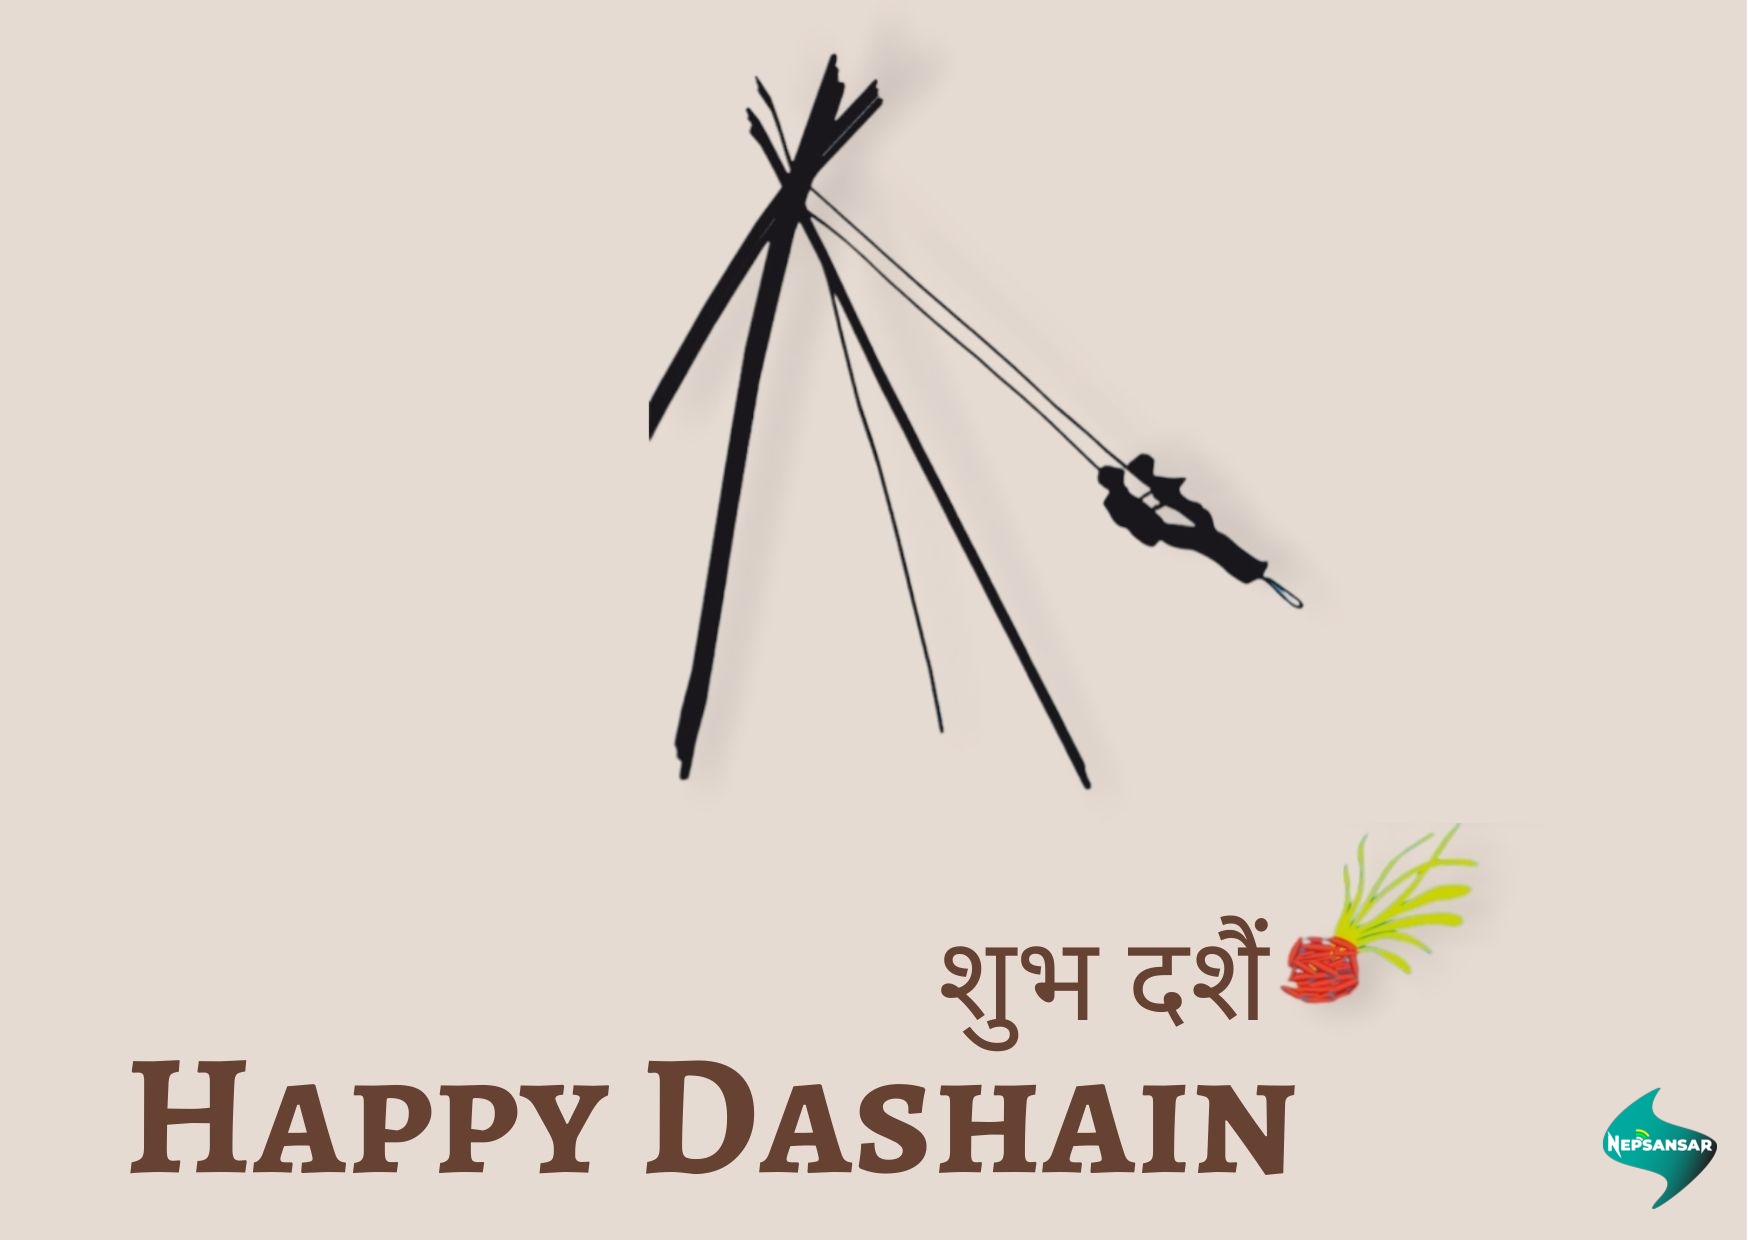 Happy Dashain Wishes, Greetings, Messages, SMS & Images